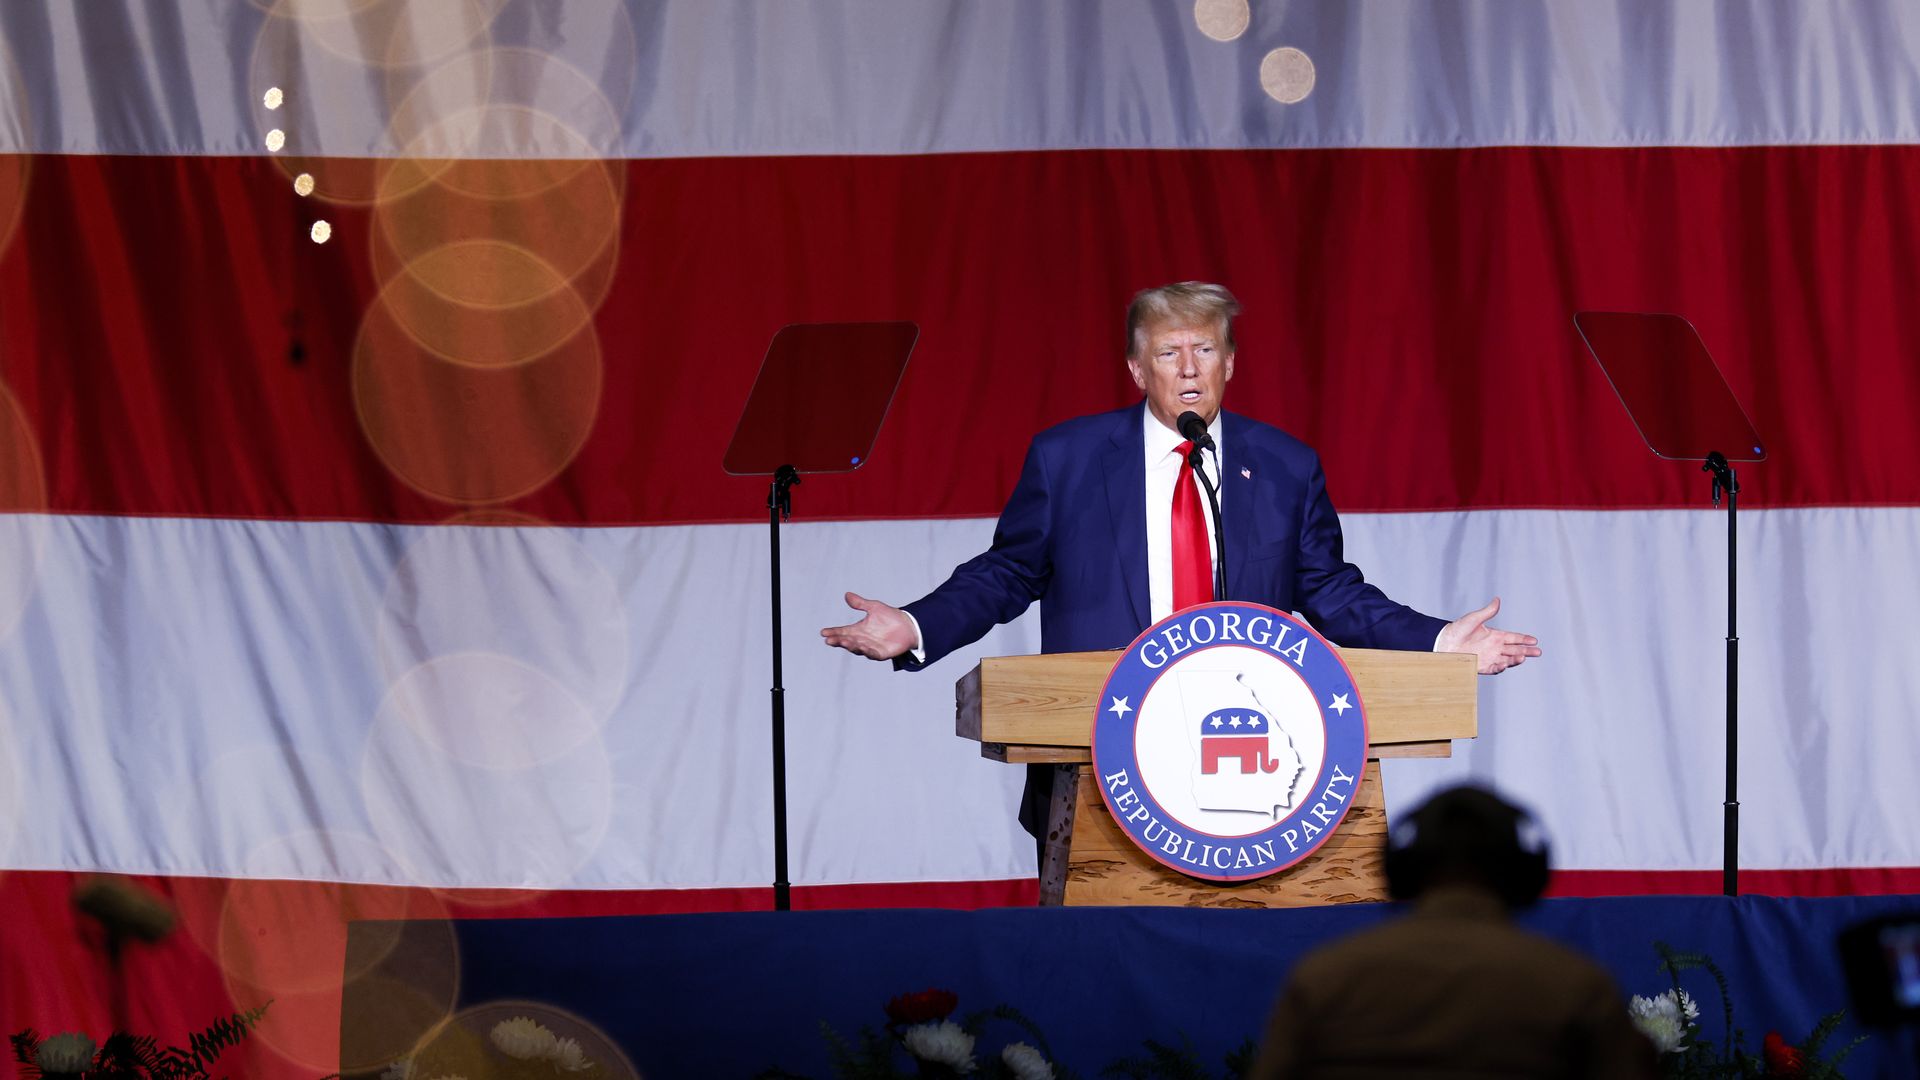 Donald Trump standing at a lectern wearing a blue suit and red tie. His arms are outstretched.